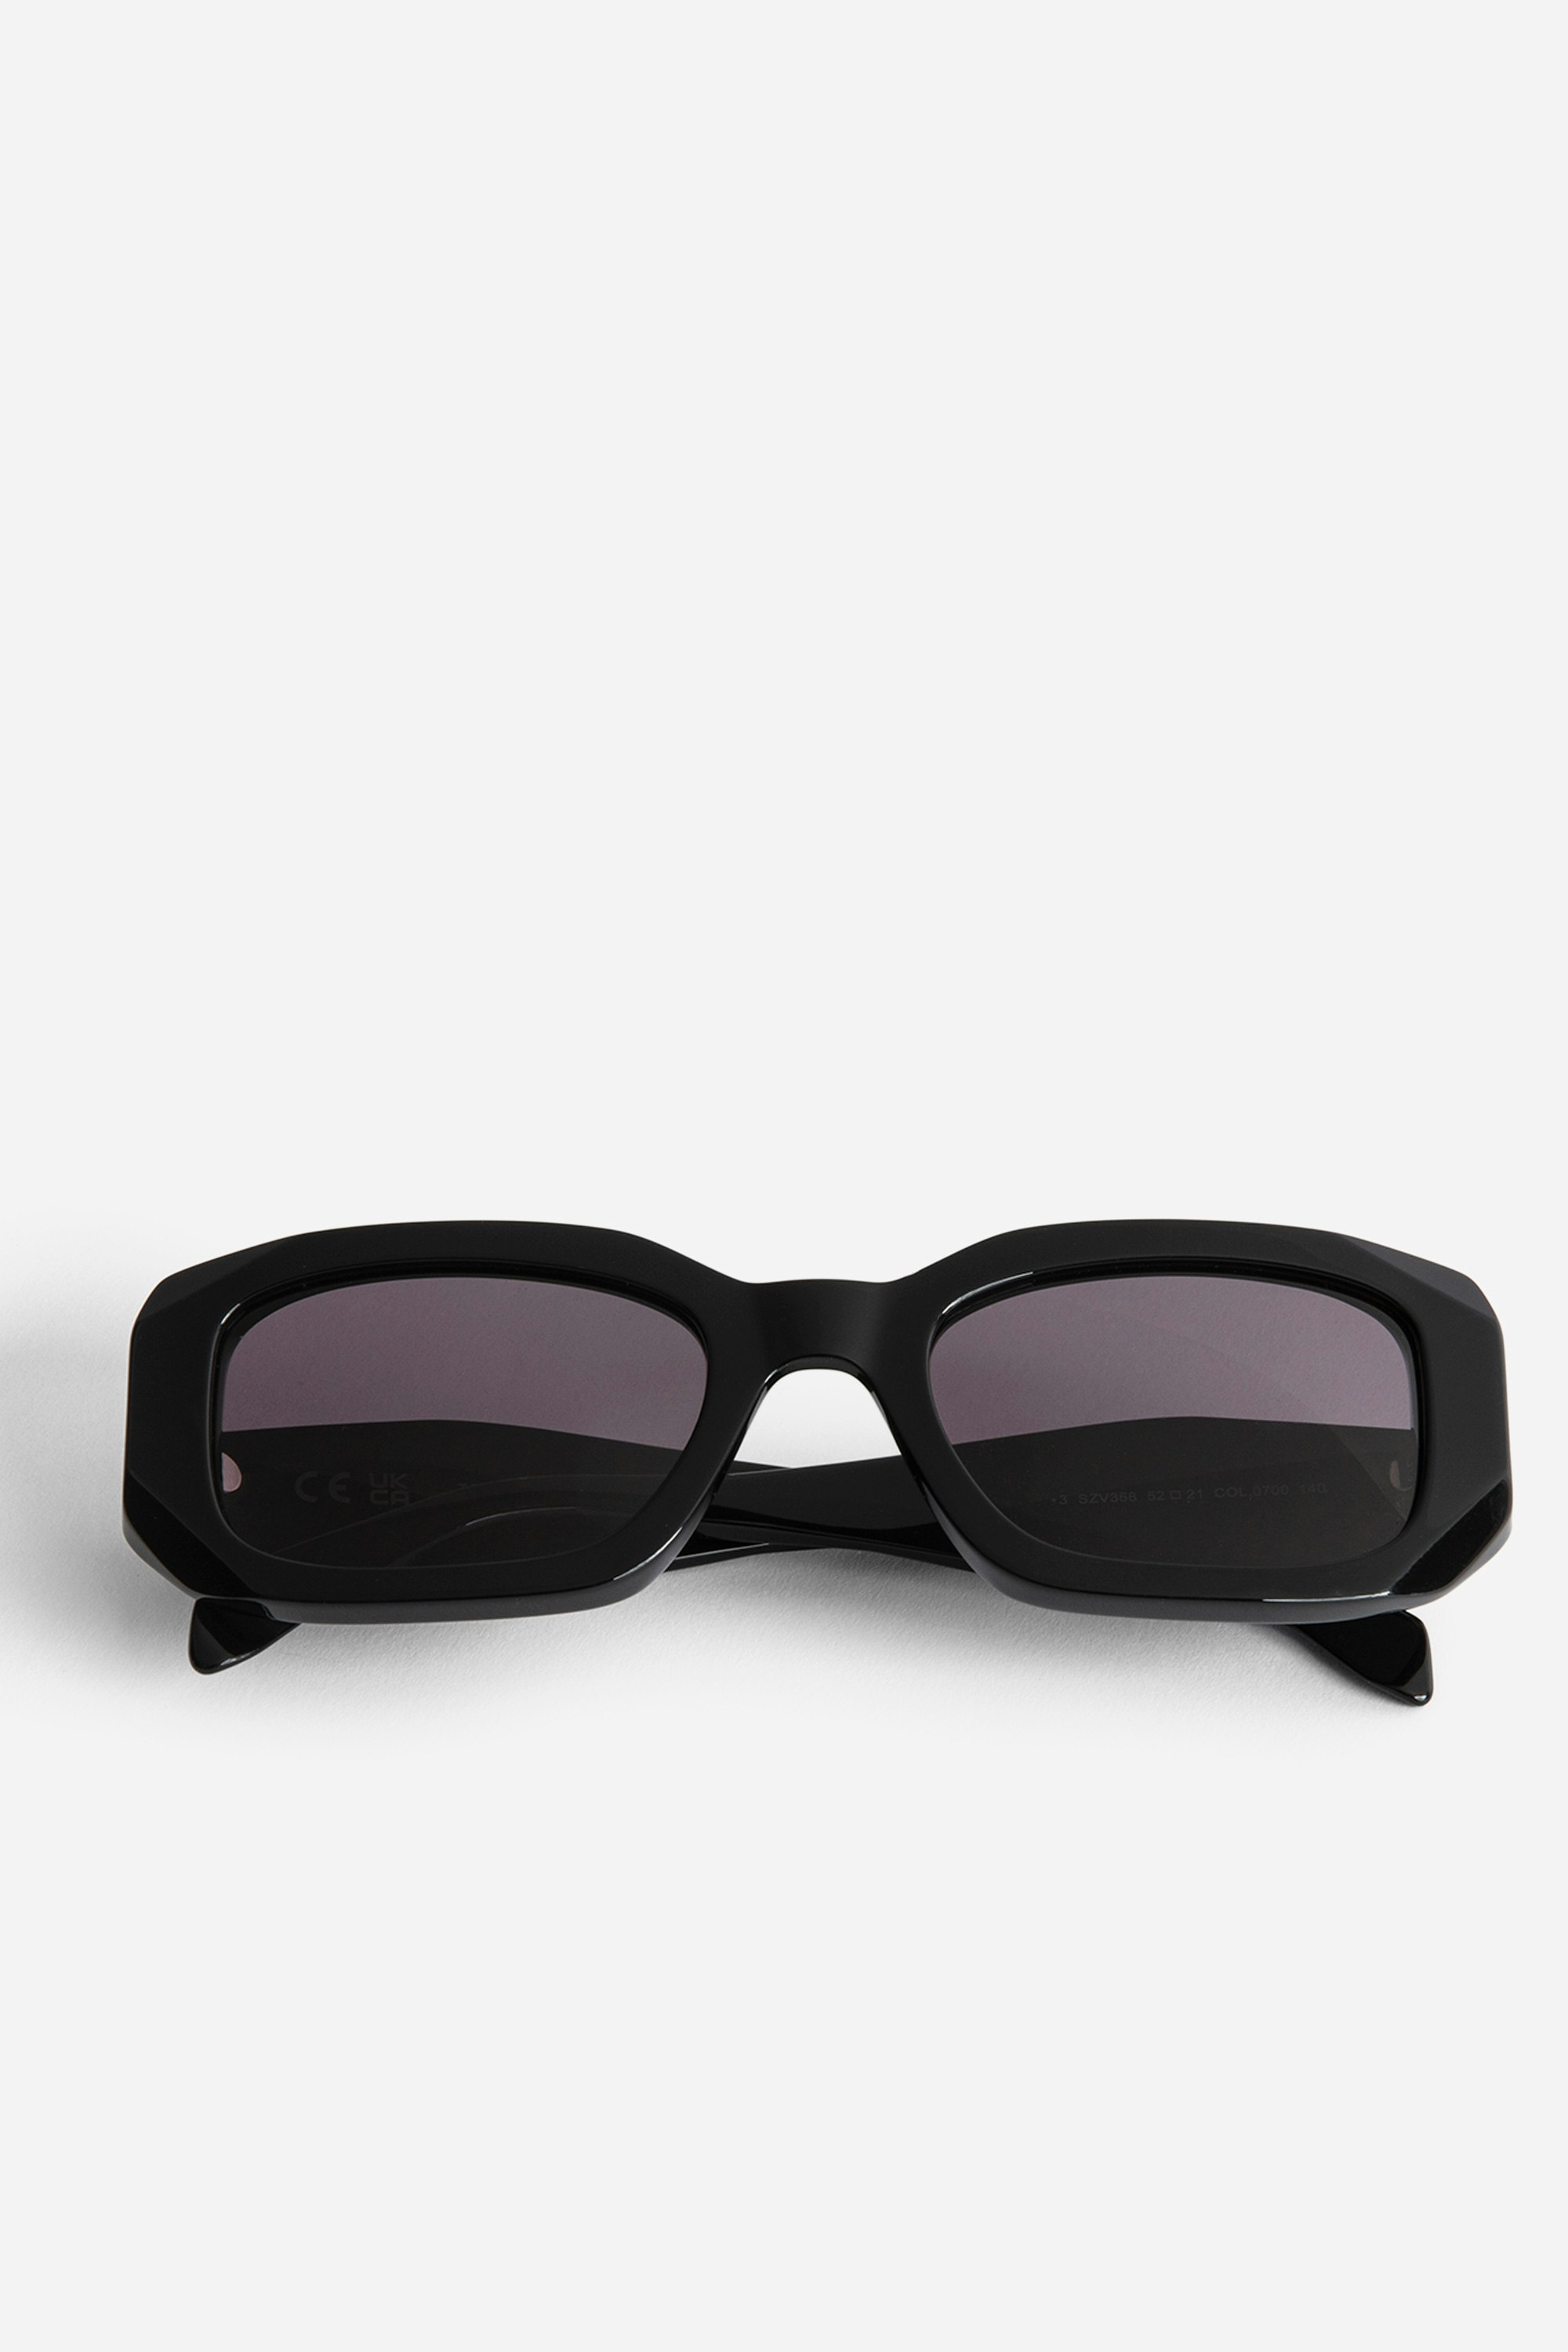 ZV23H3 Sunglasses - Unisex black rectangular sunglasses with wings on the unstructured temples.